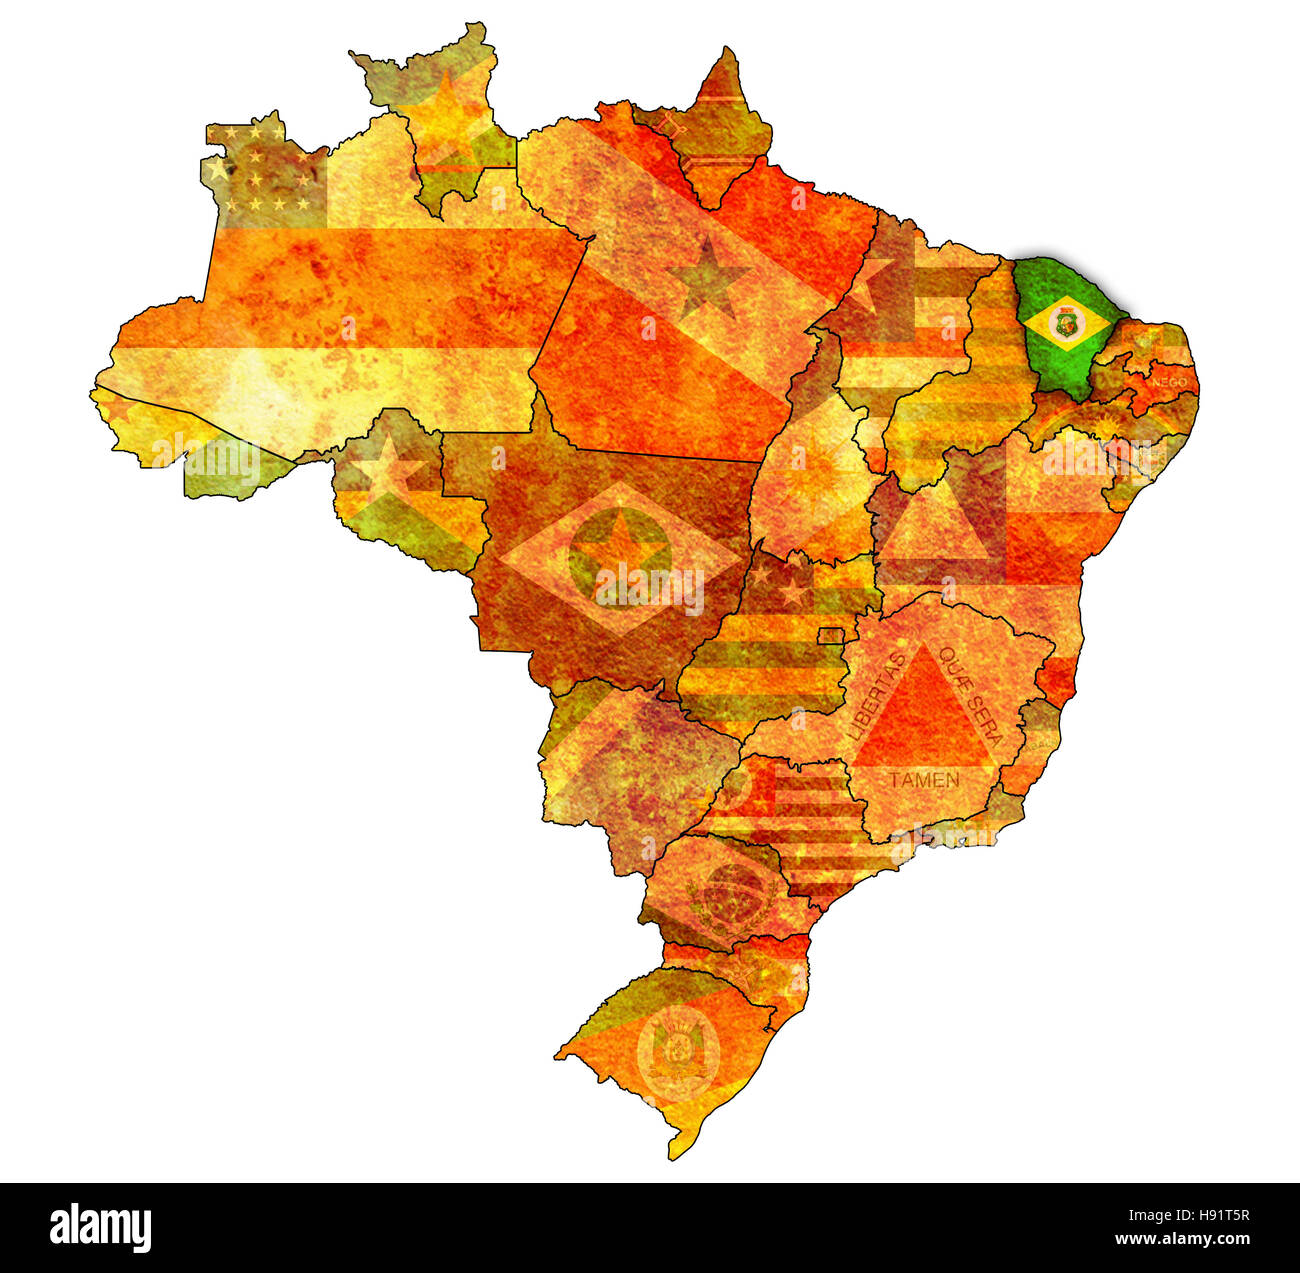 ceara on admistration map of brazil with flags Stock Photo